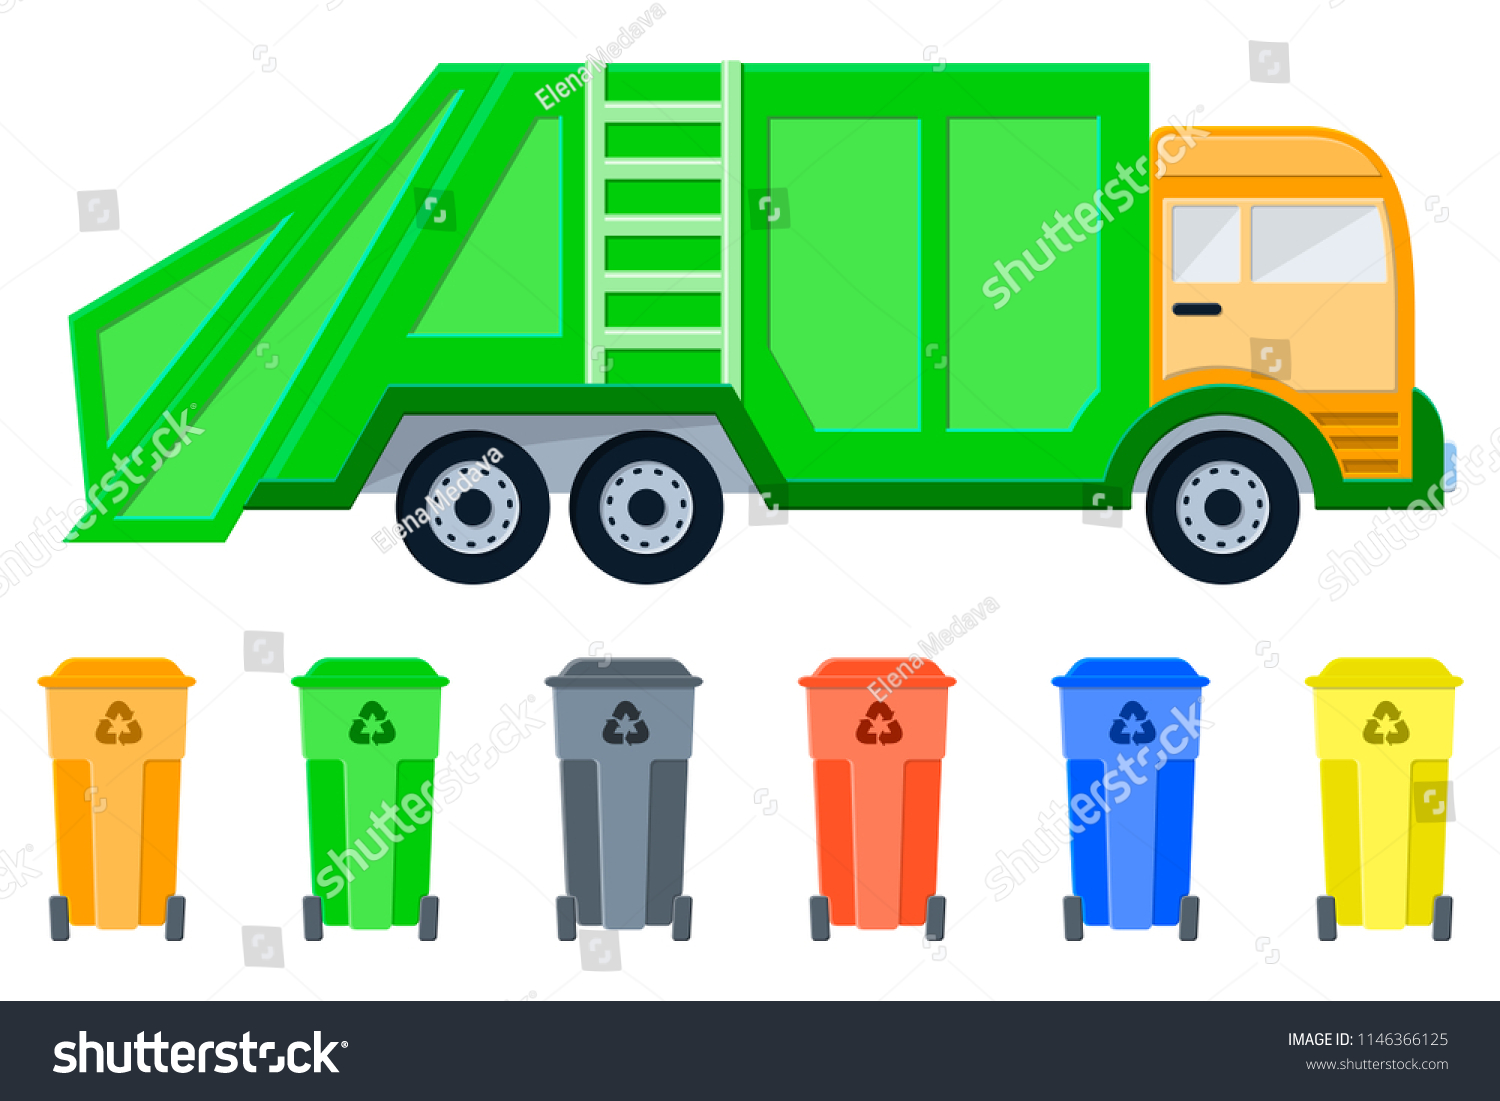 SVG of Vehicle garbage truck and dumpsters. Isolated on white background. Flat style vector illustration. Eps10 svg